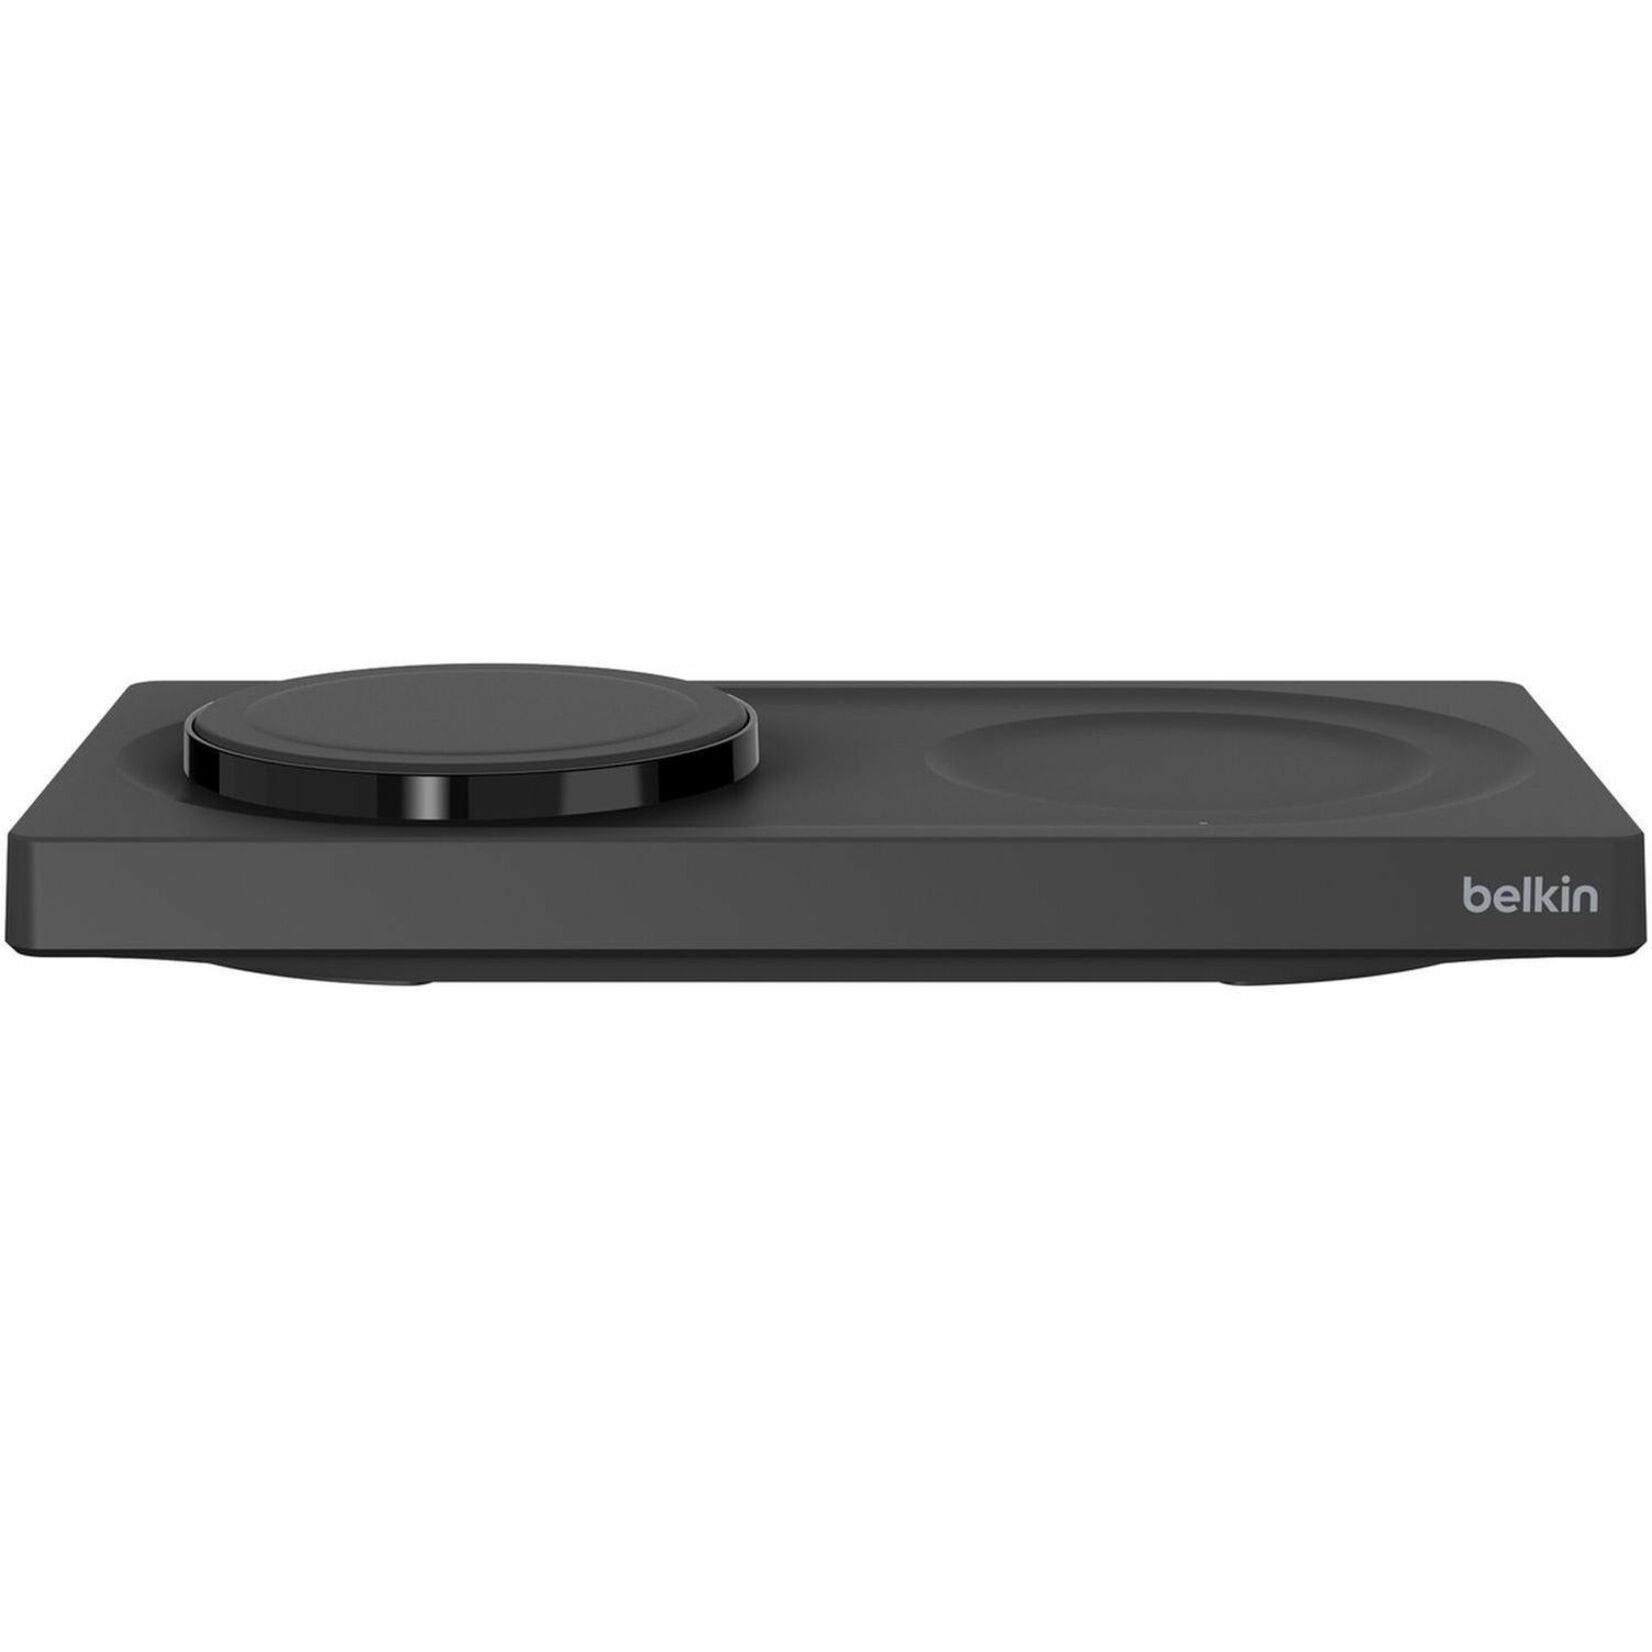 Belkin WIZ019TTBK BoostCharge Pro Induction Charger, 2 Year Limited Warranty, MagSafe Technology